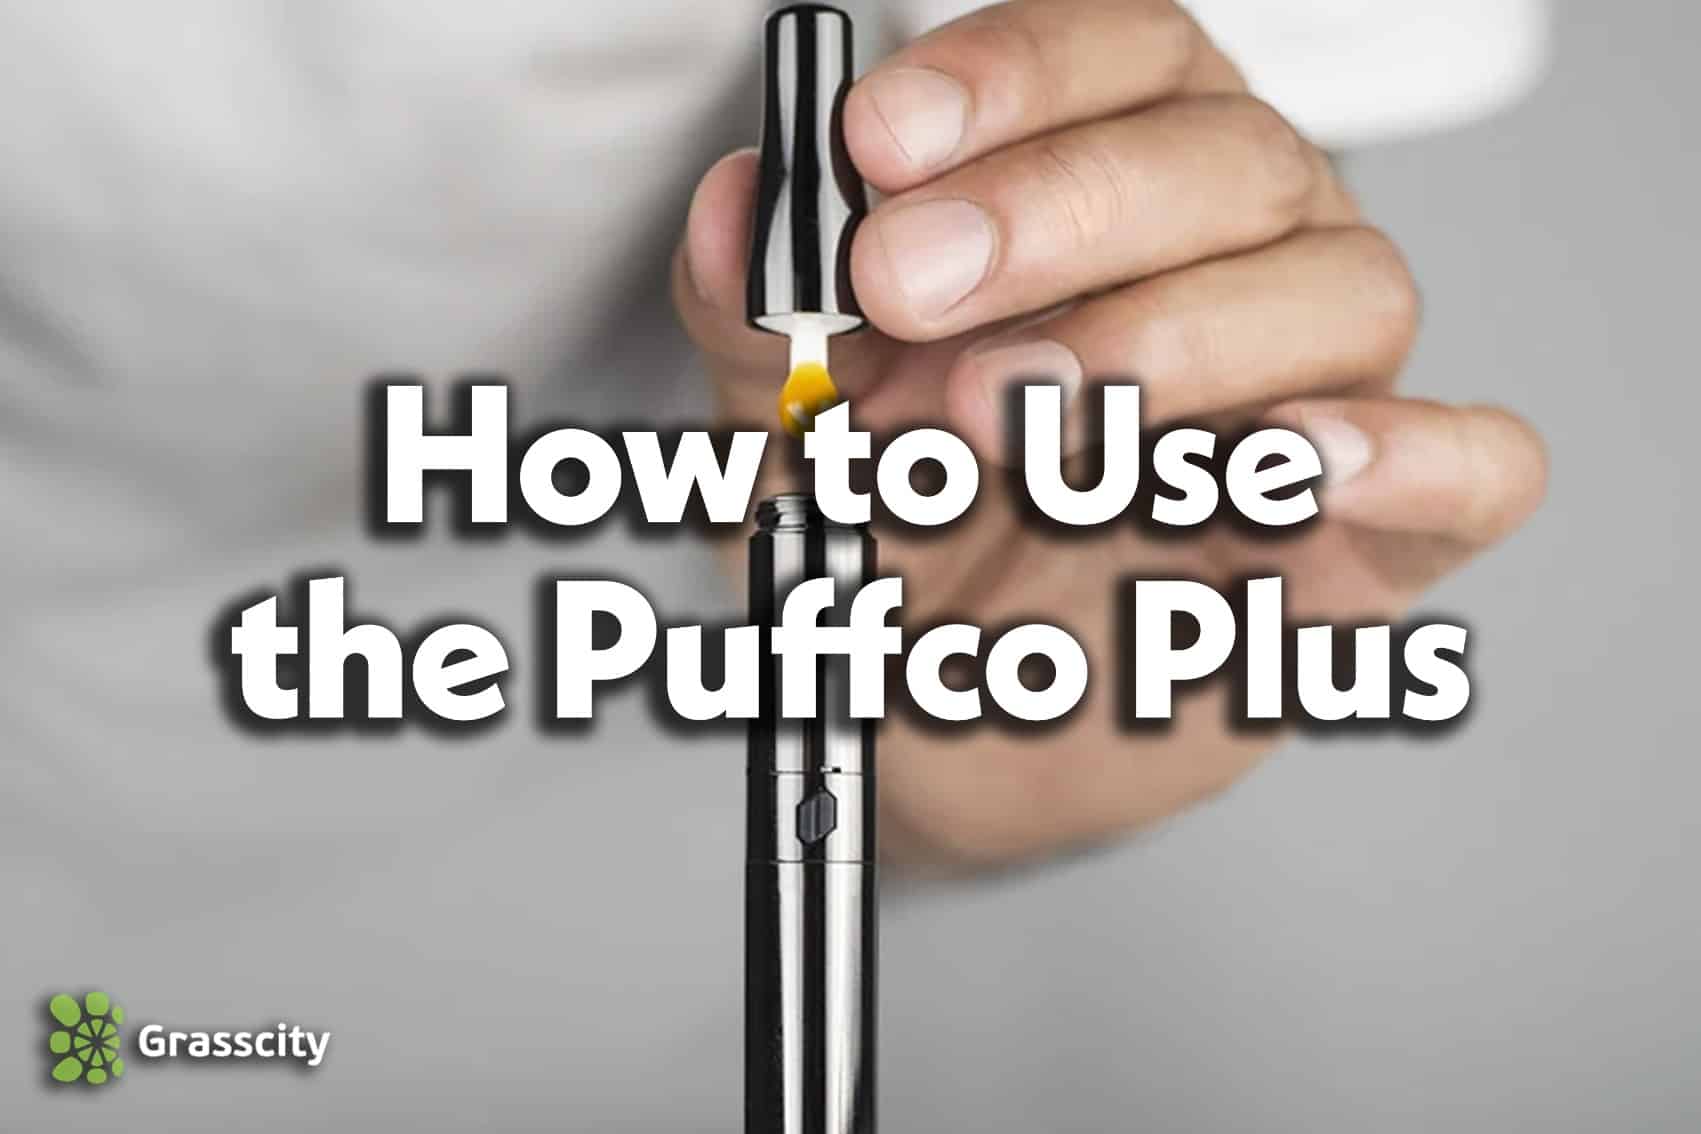 How to use the Puffco Plus?